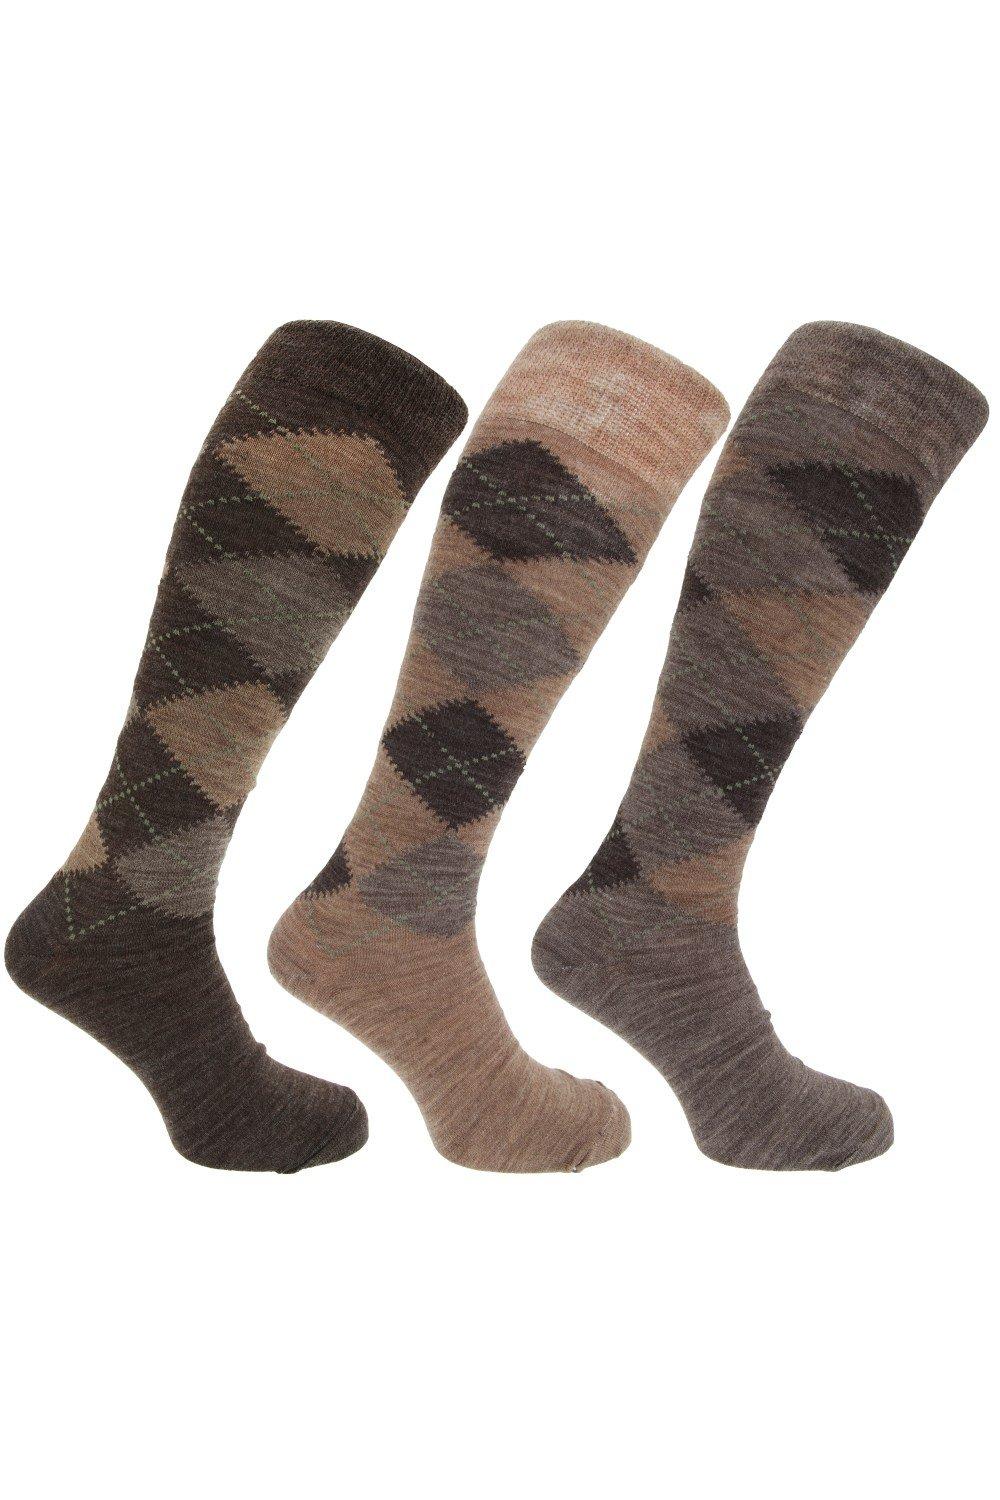 Traditional Argyle Pattern Long Length Lambs Wool Blend Socks (Pack Of 3)